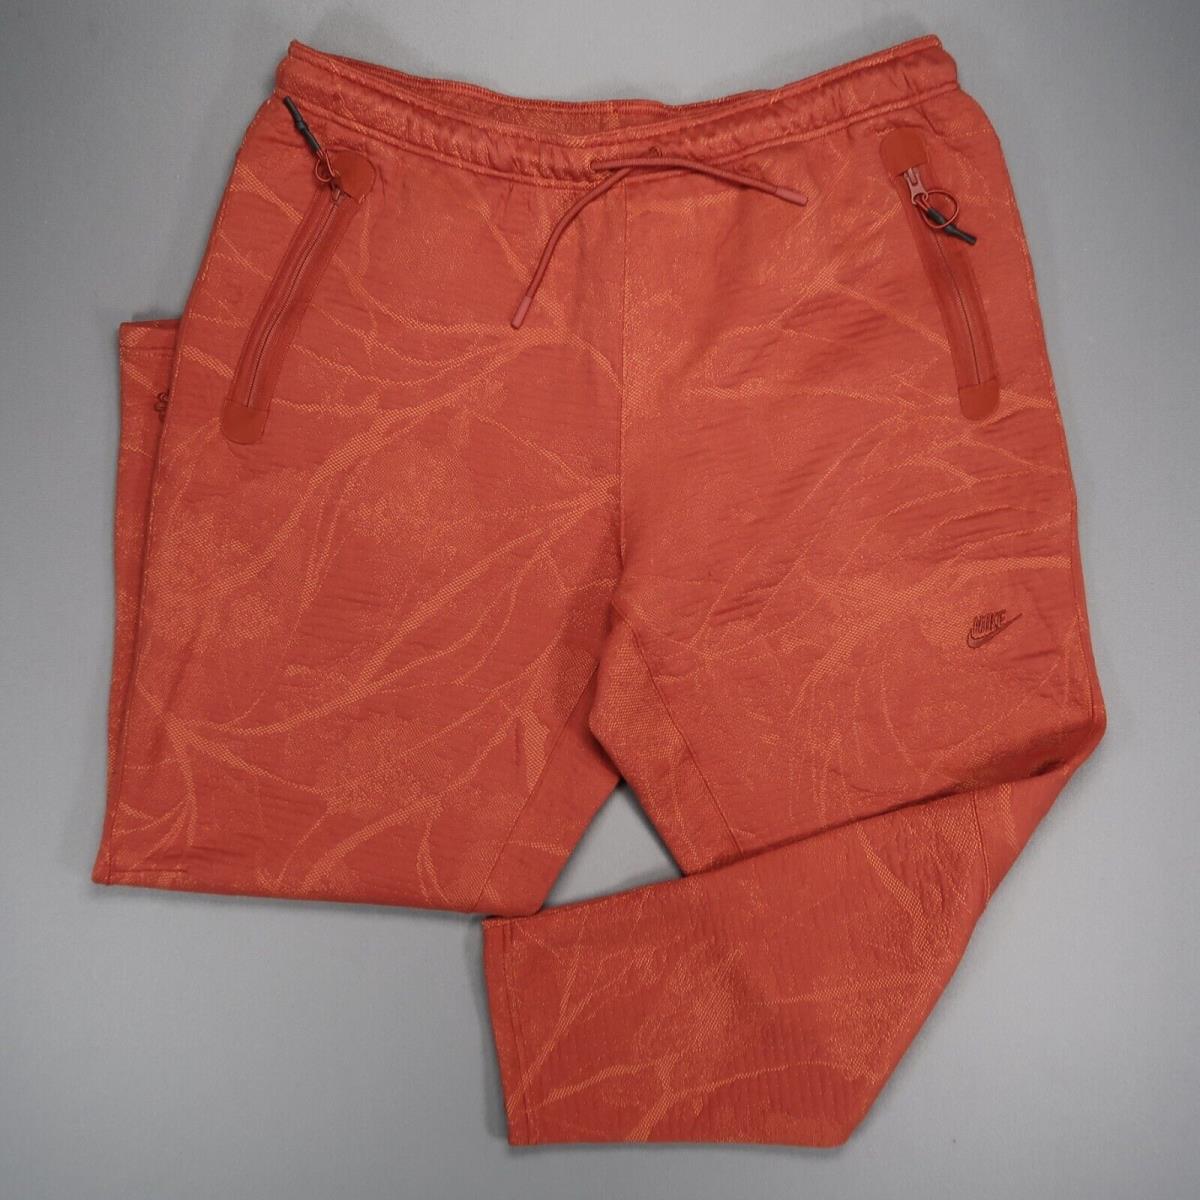 Nike Pants Mens Xxl Red Orange Tech Pack Fleece Therma Fit Adv Loose Fit